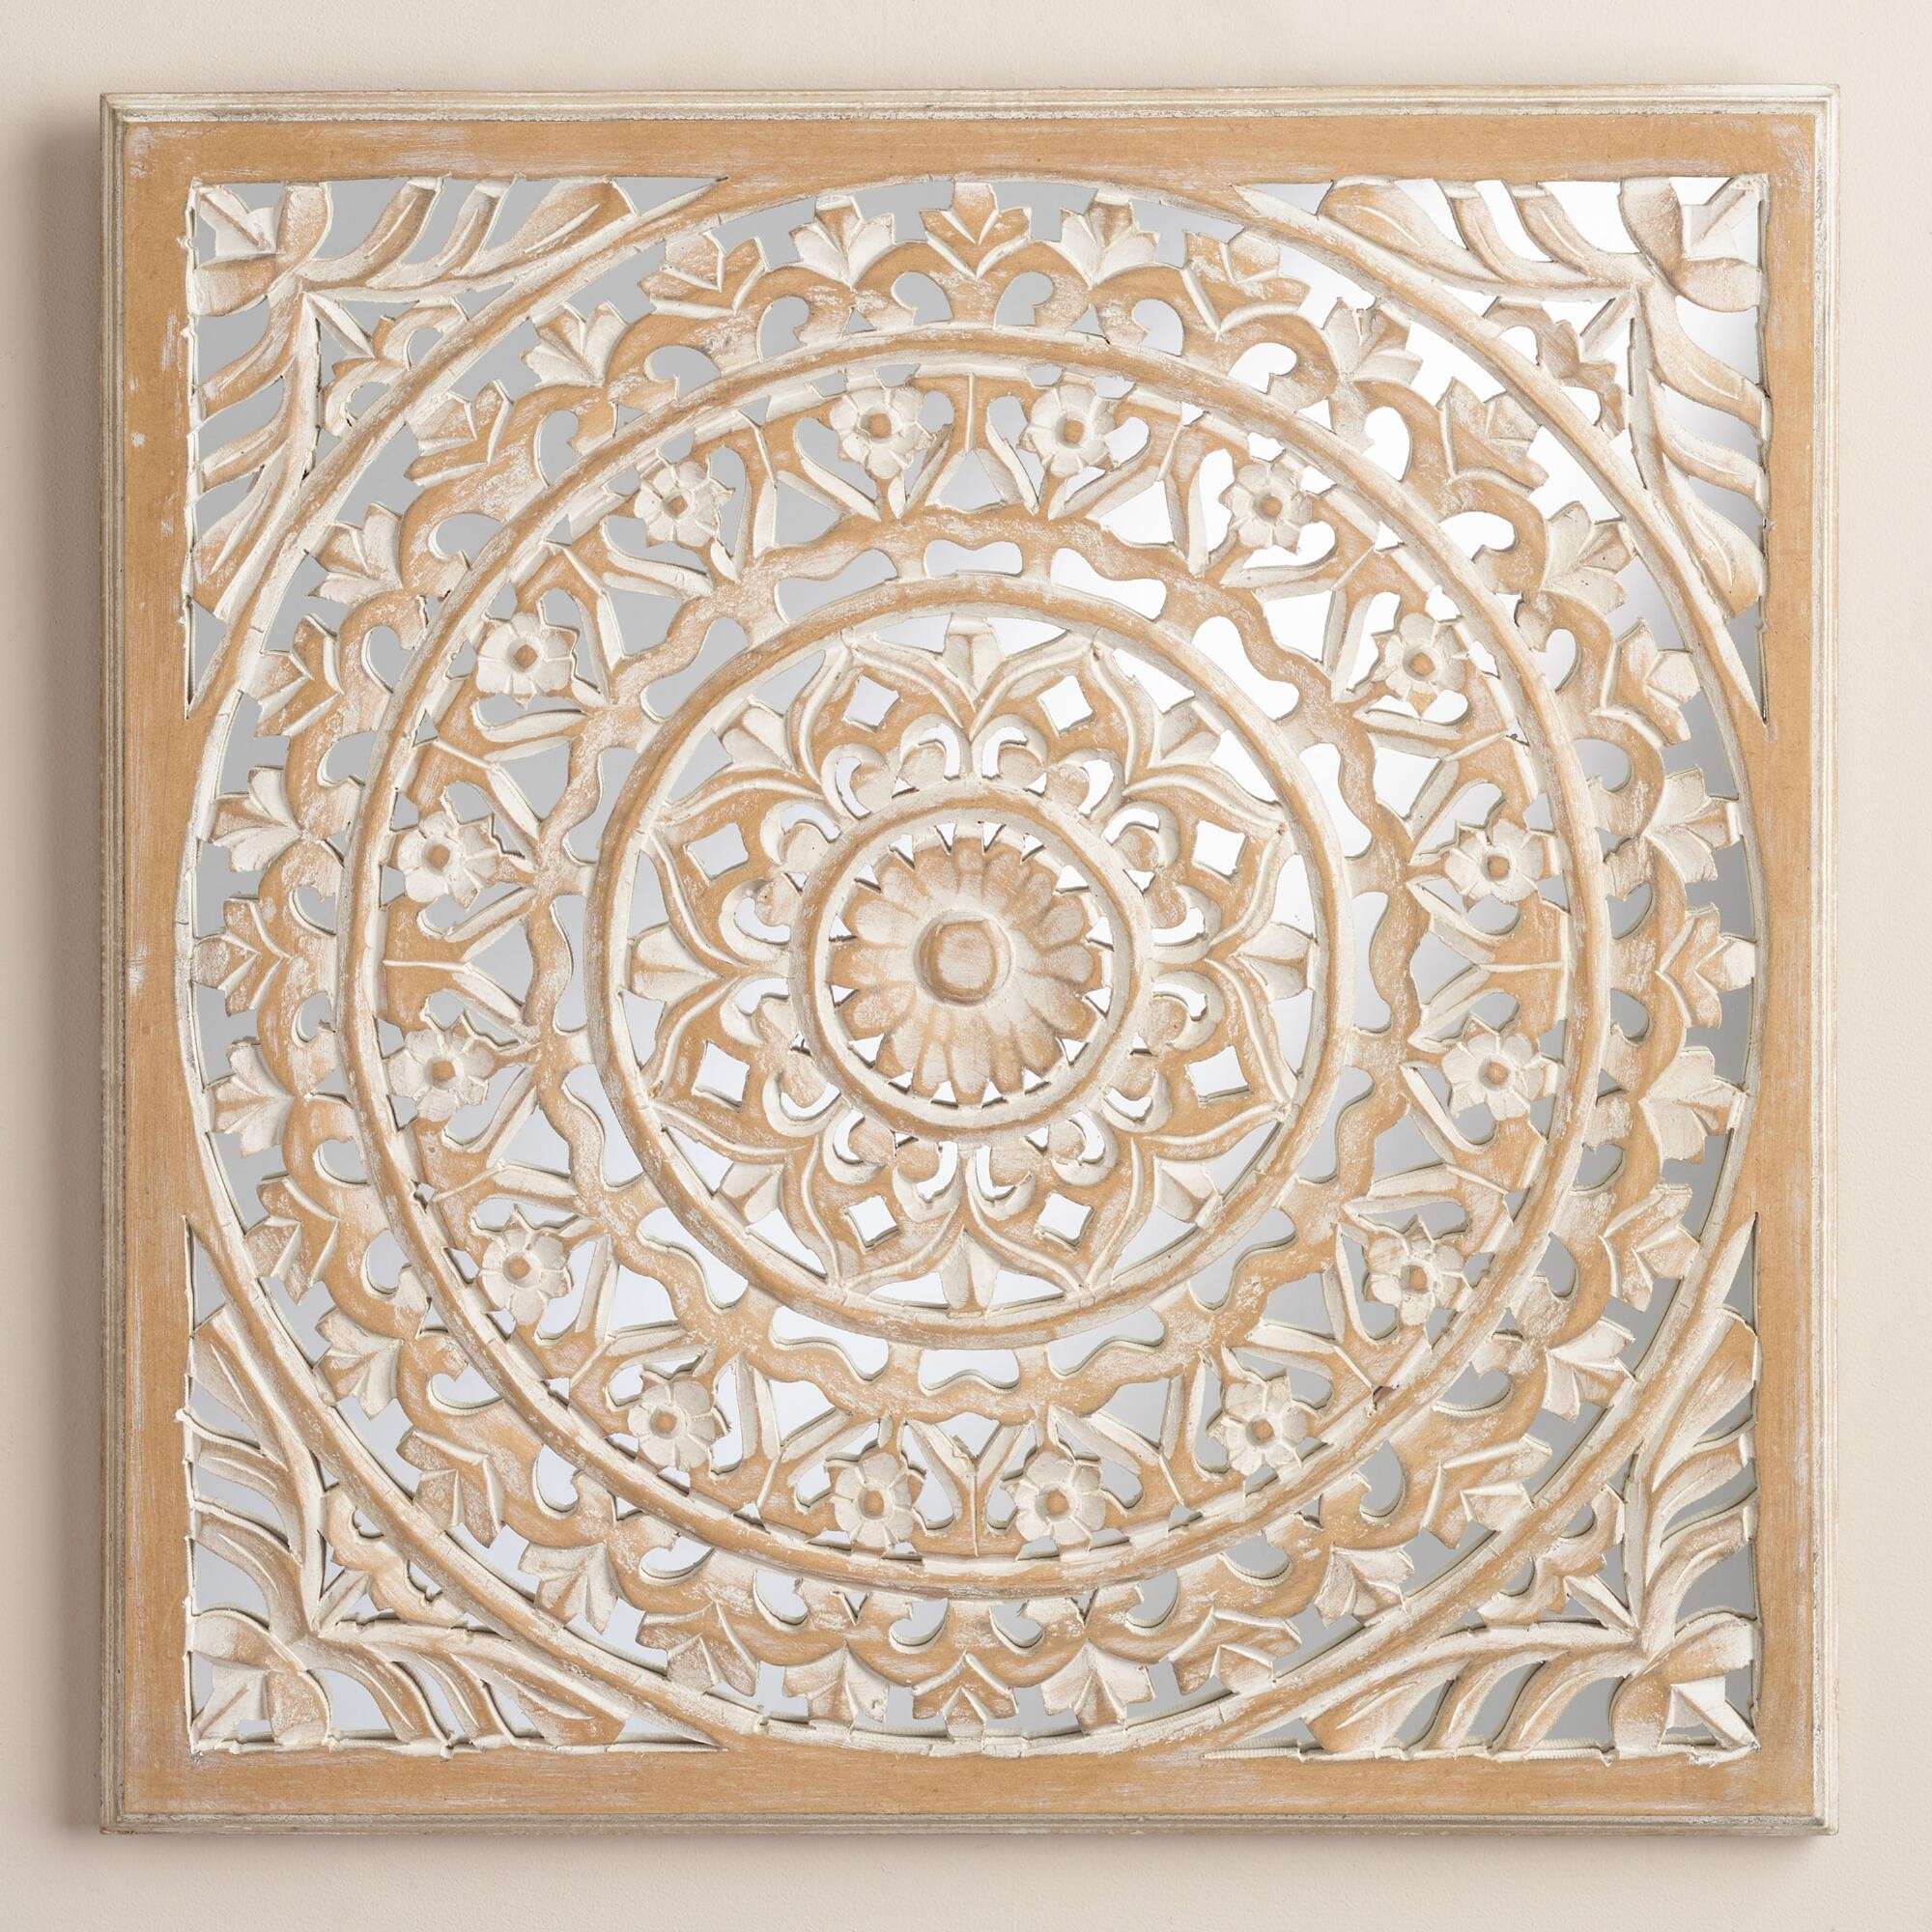 Carved Wood Wall Art Decor Beautiful Carved Mirrored Leela Wall ...